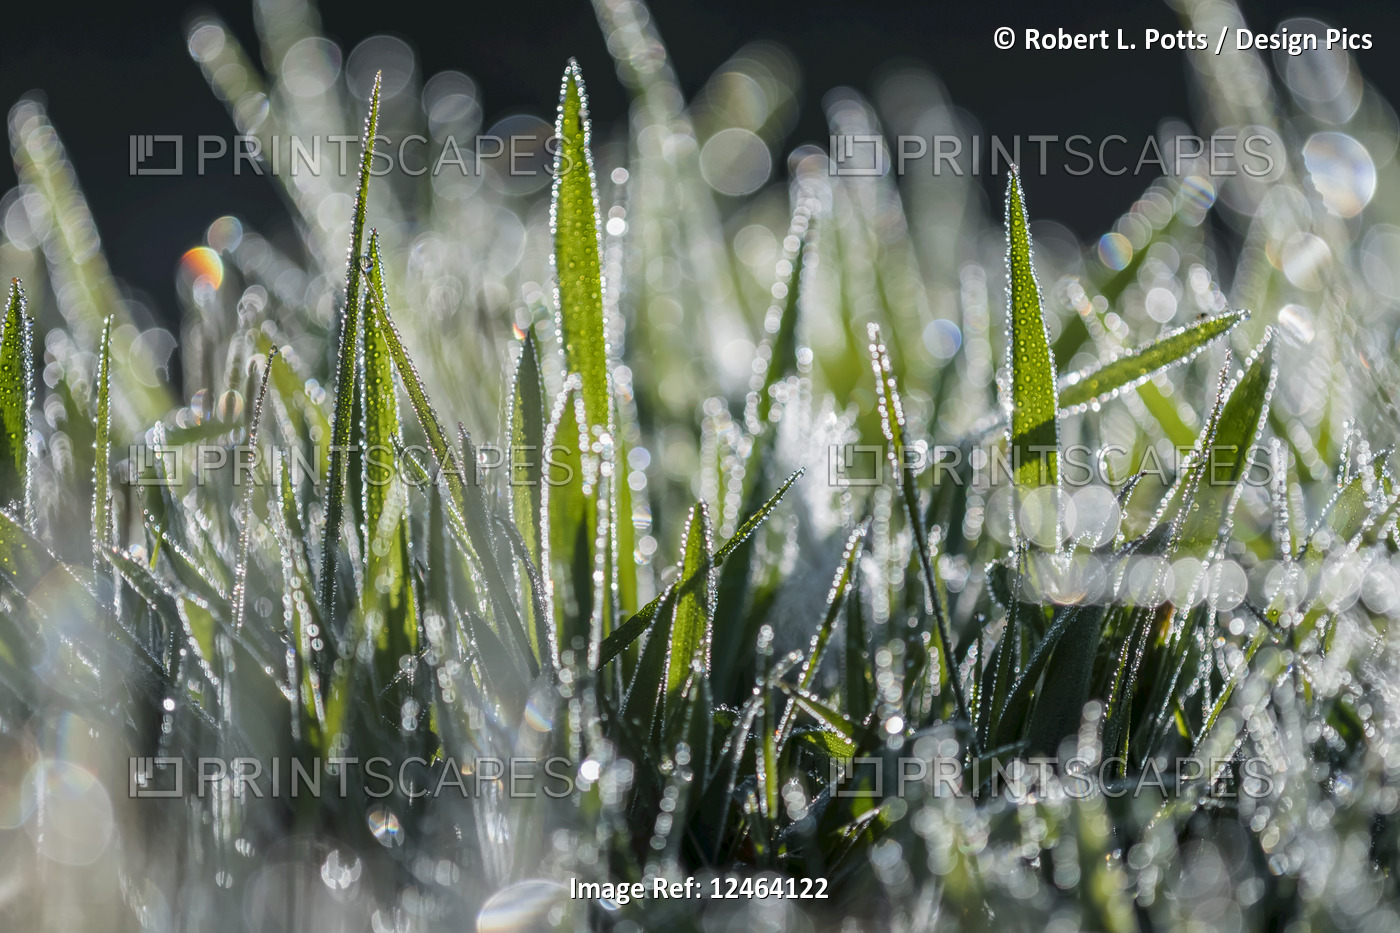 Dew reflects light in the lawn; Astoria, Oregon, United States of America